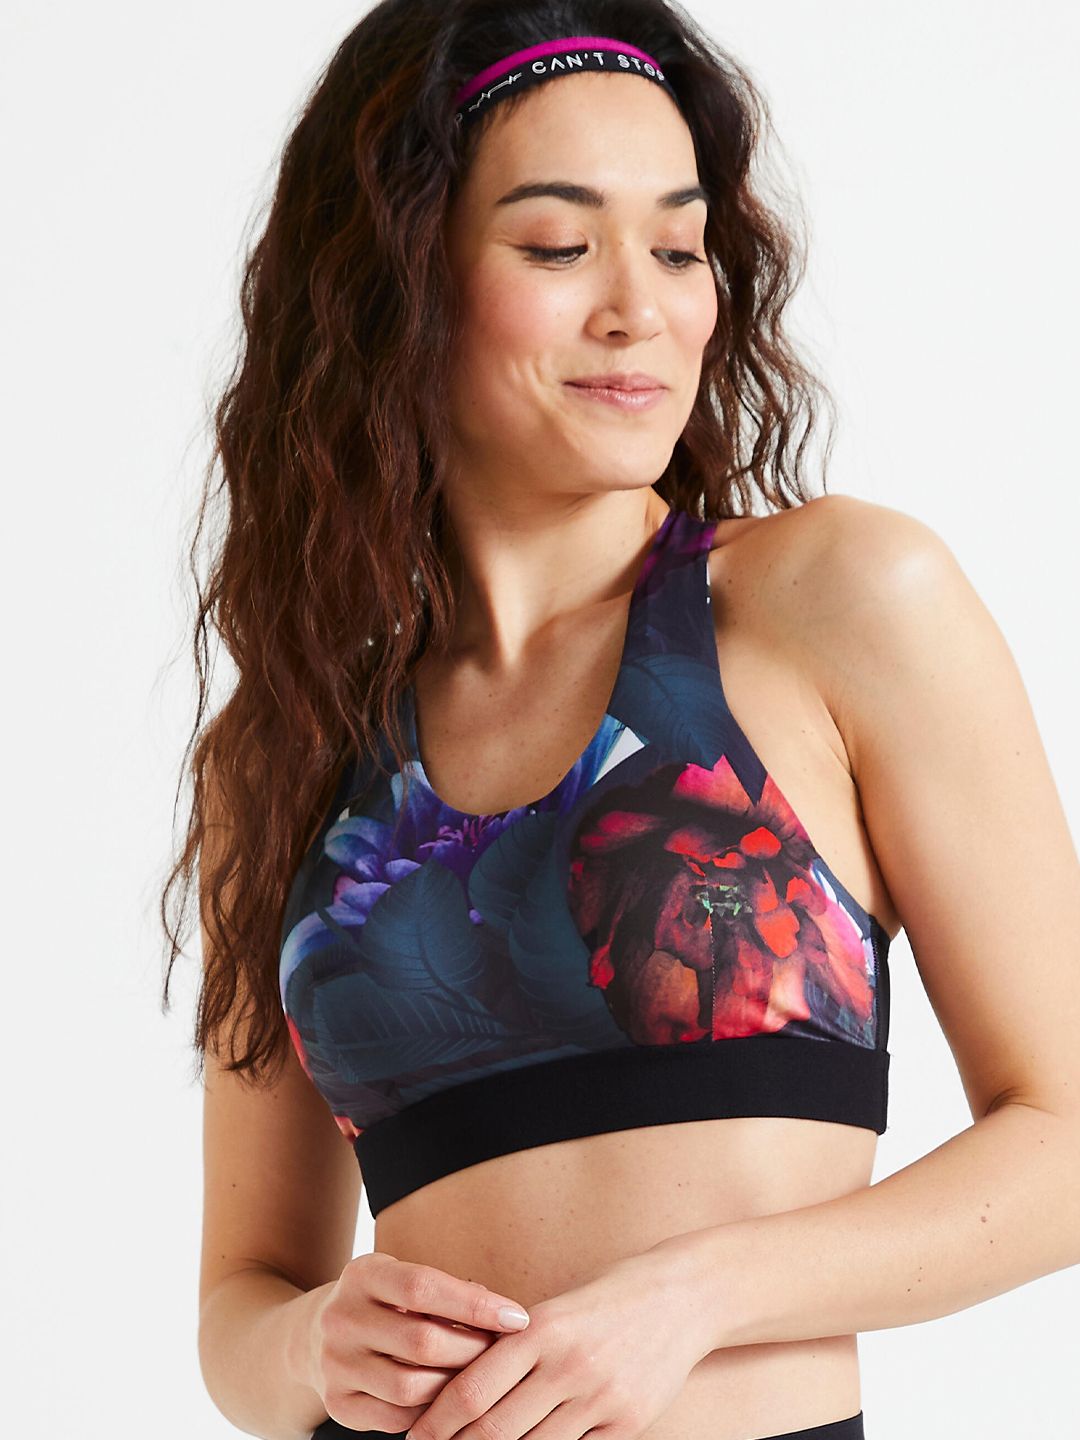 Domyos By Decathlon Blue & Red Graphic Workout Bra Full Coverage - Heavily  Padded Price in India, Full Specifications & Offers